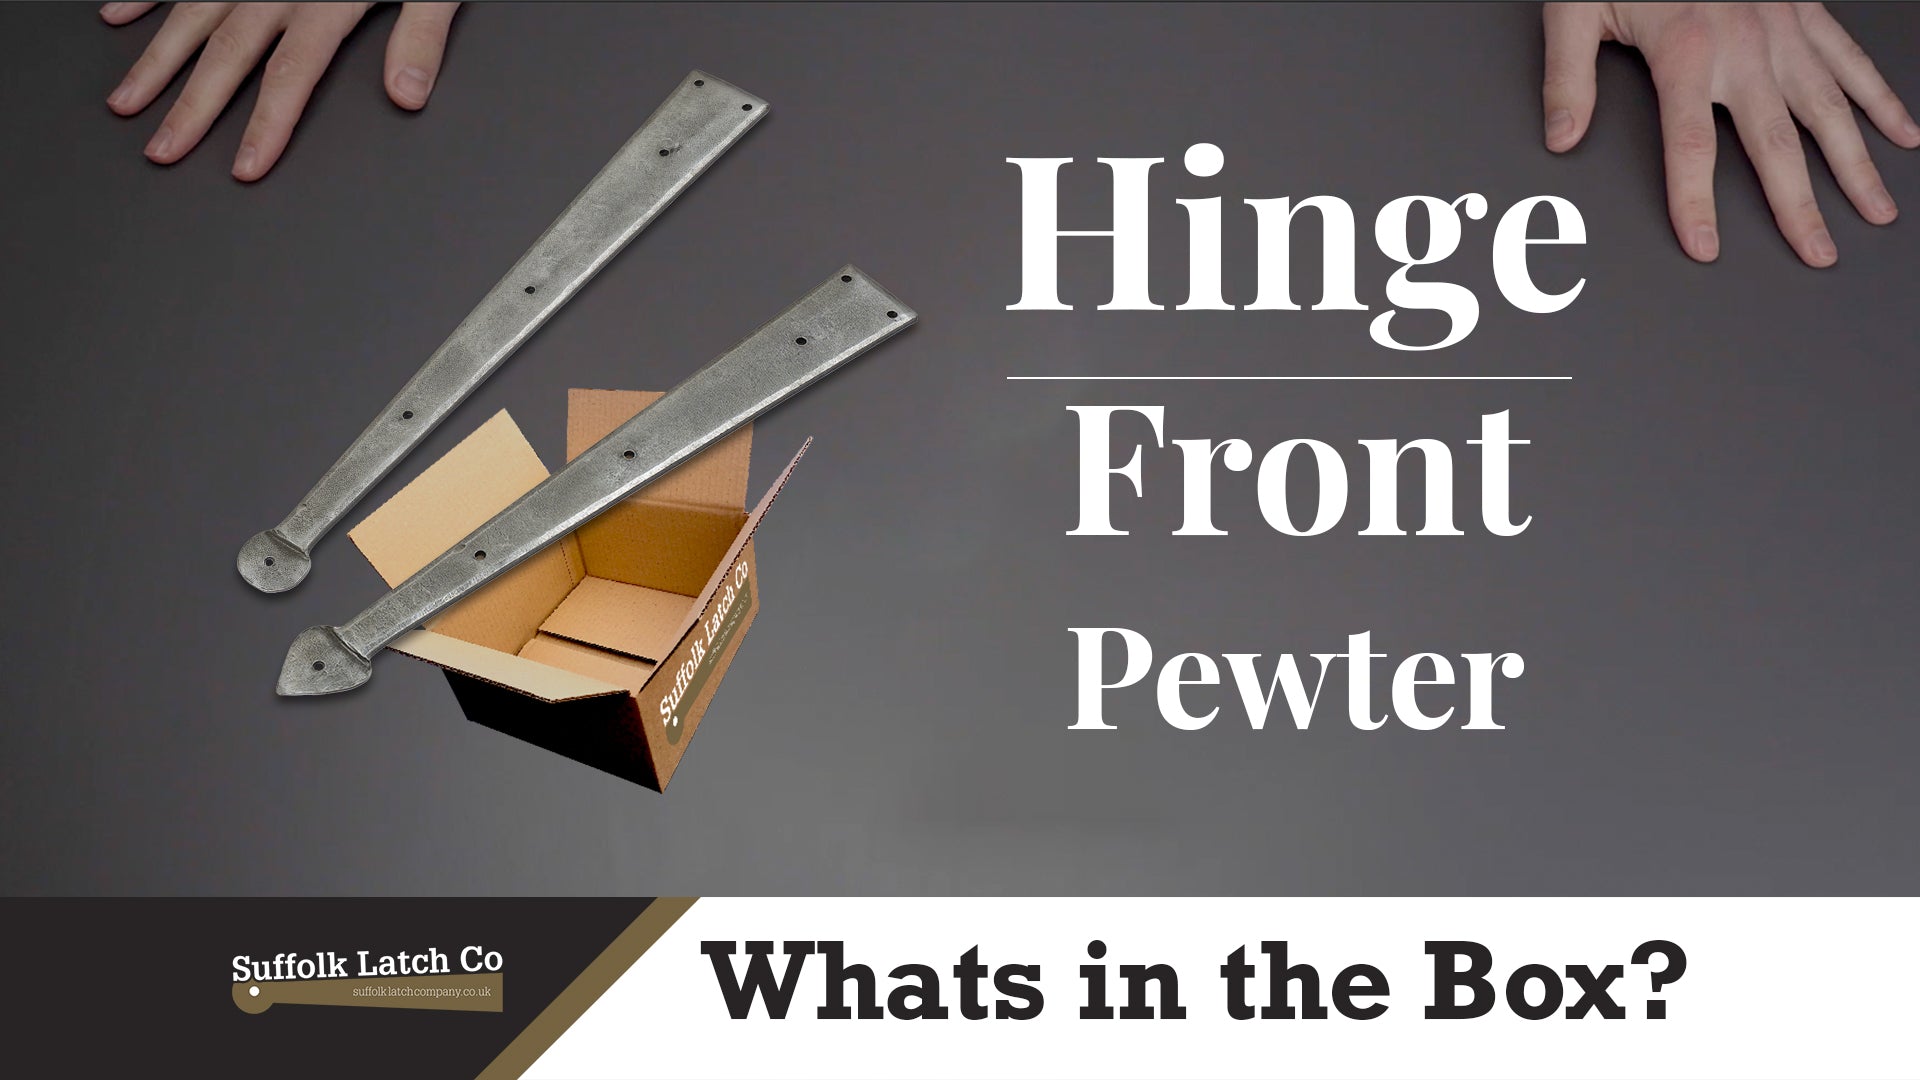 What's In The Box: Hinge Fronts Pewter